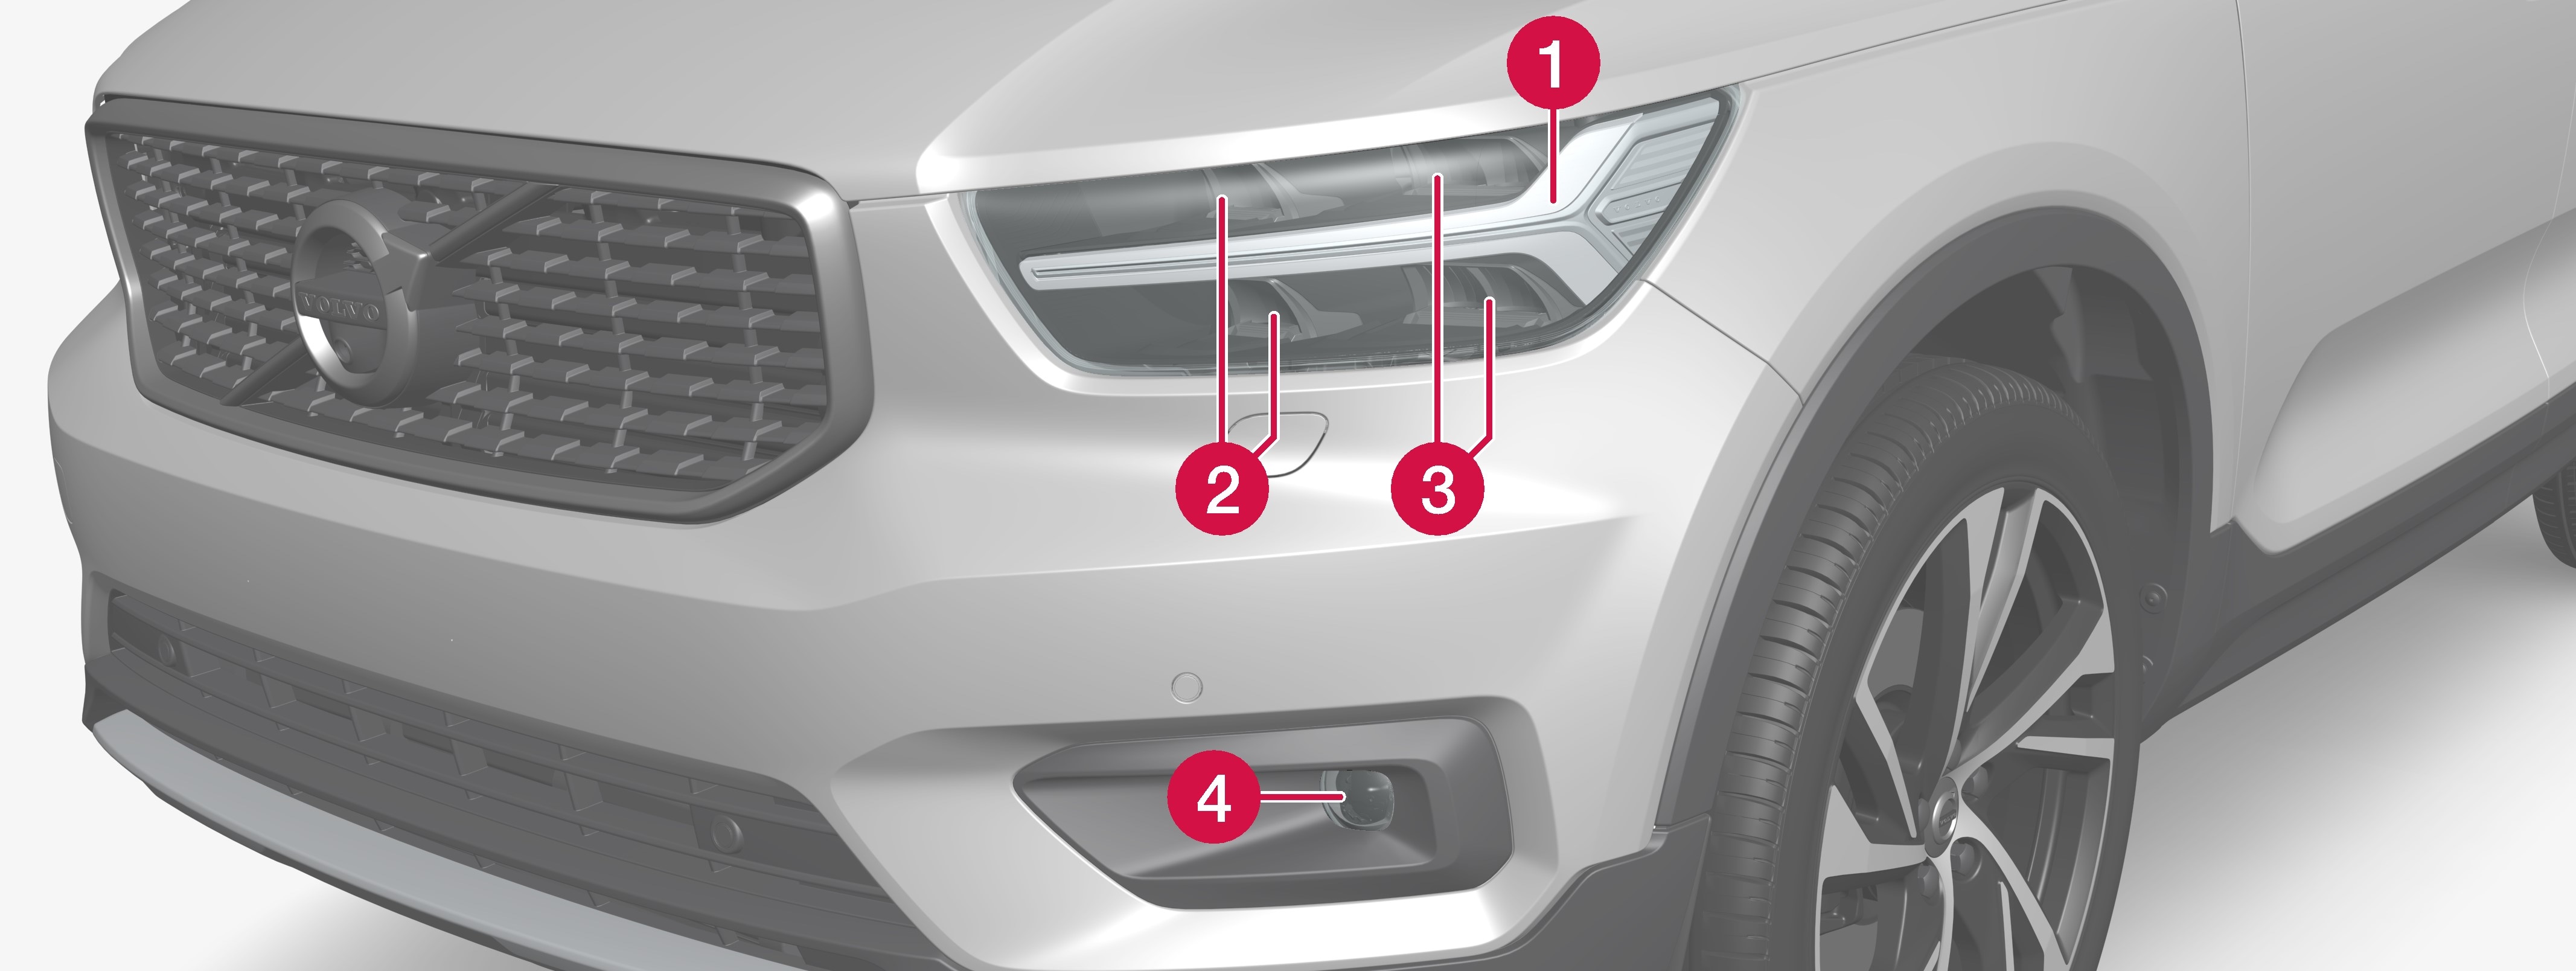 P6-1746-XC40-Front light positions